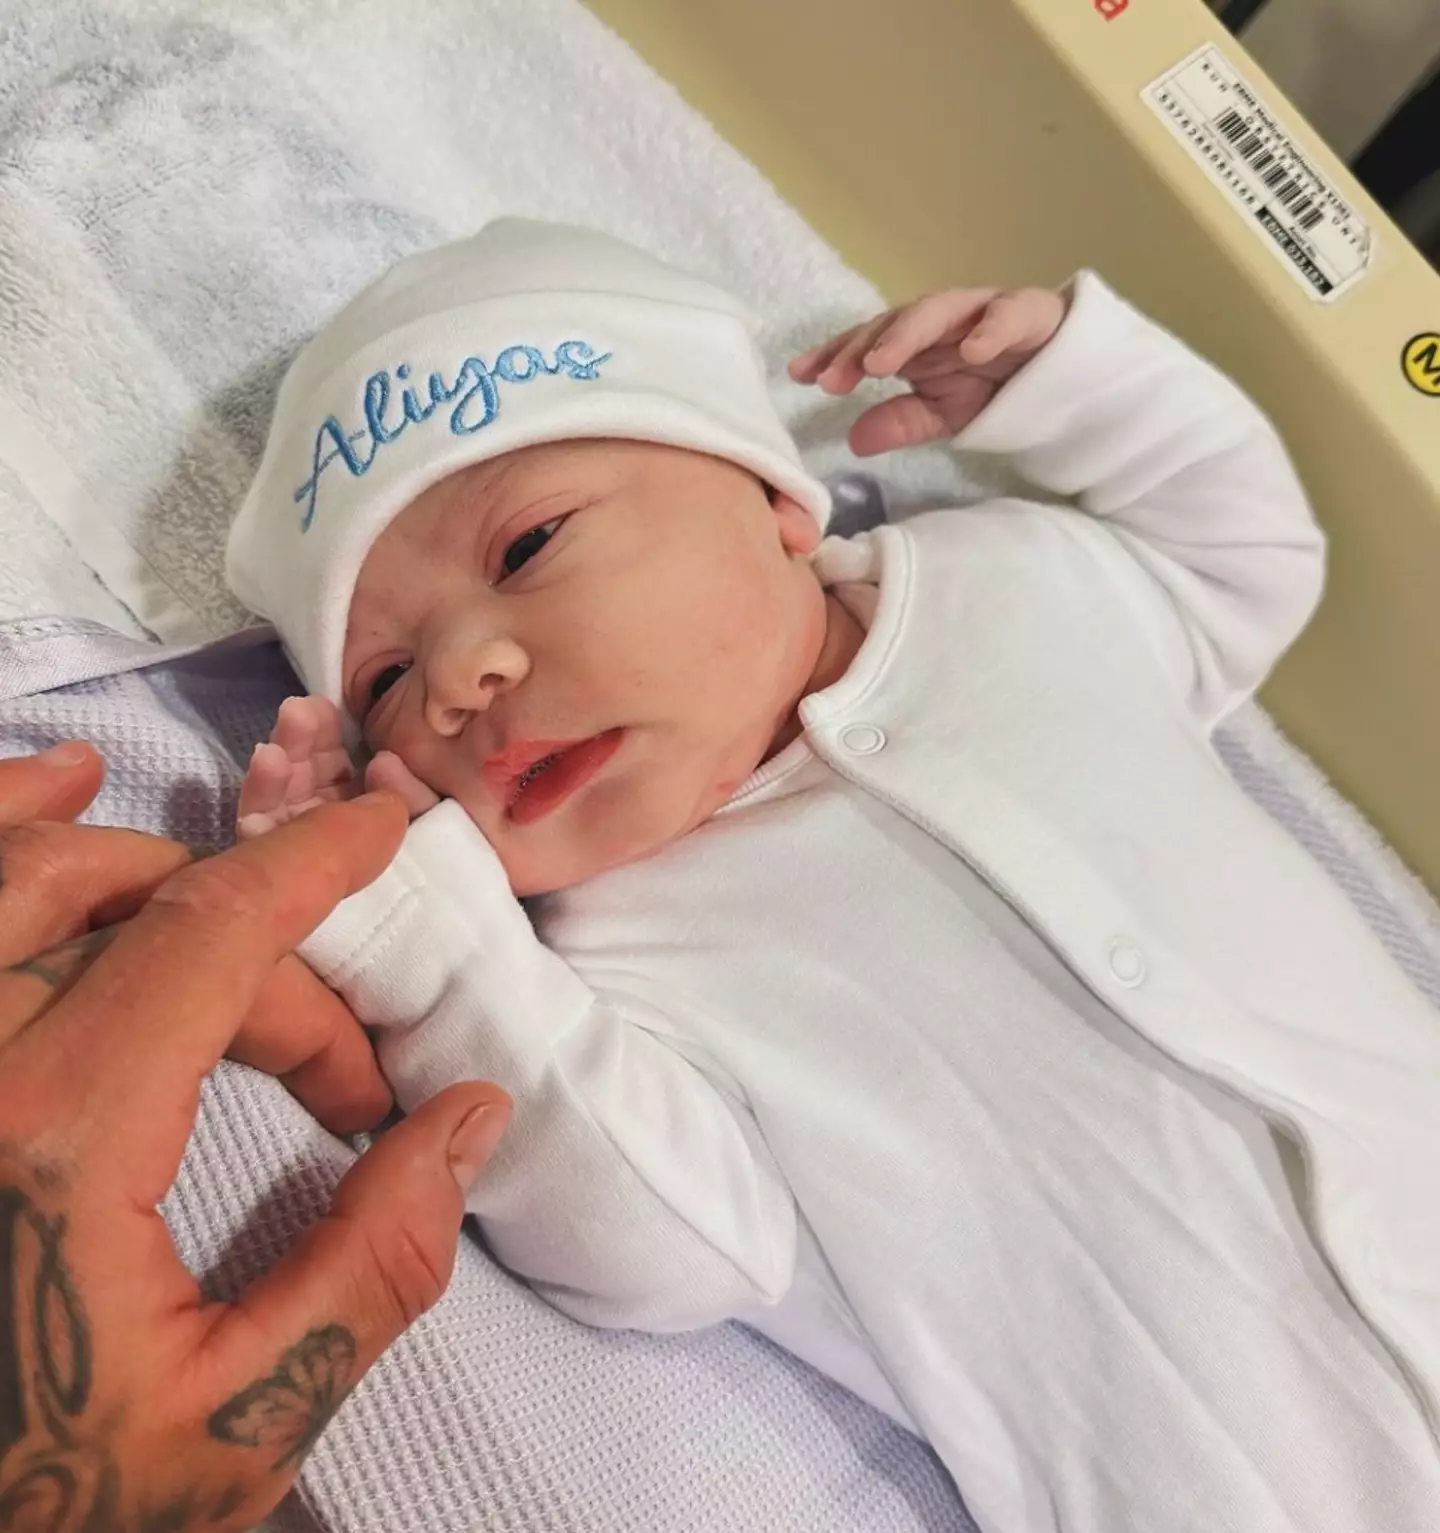 The reality TV star welcomed his baby boy, Aliyas, last month (16 January).